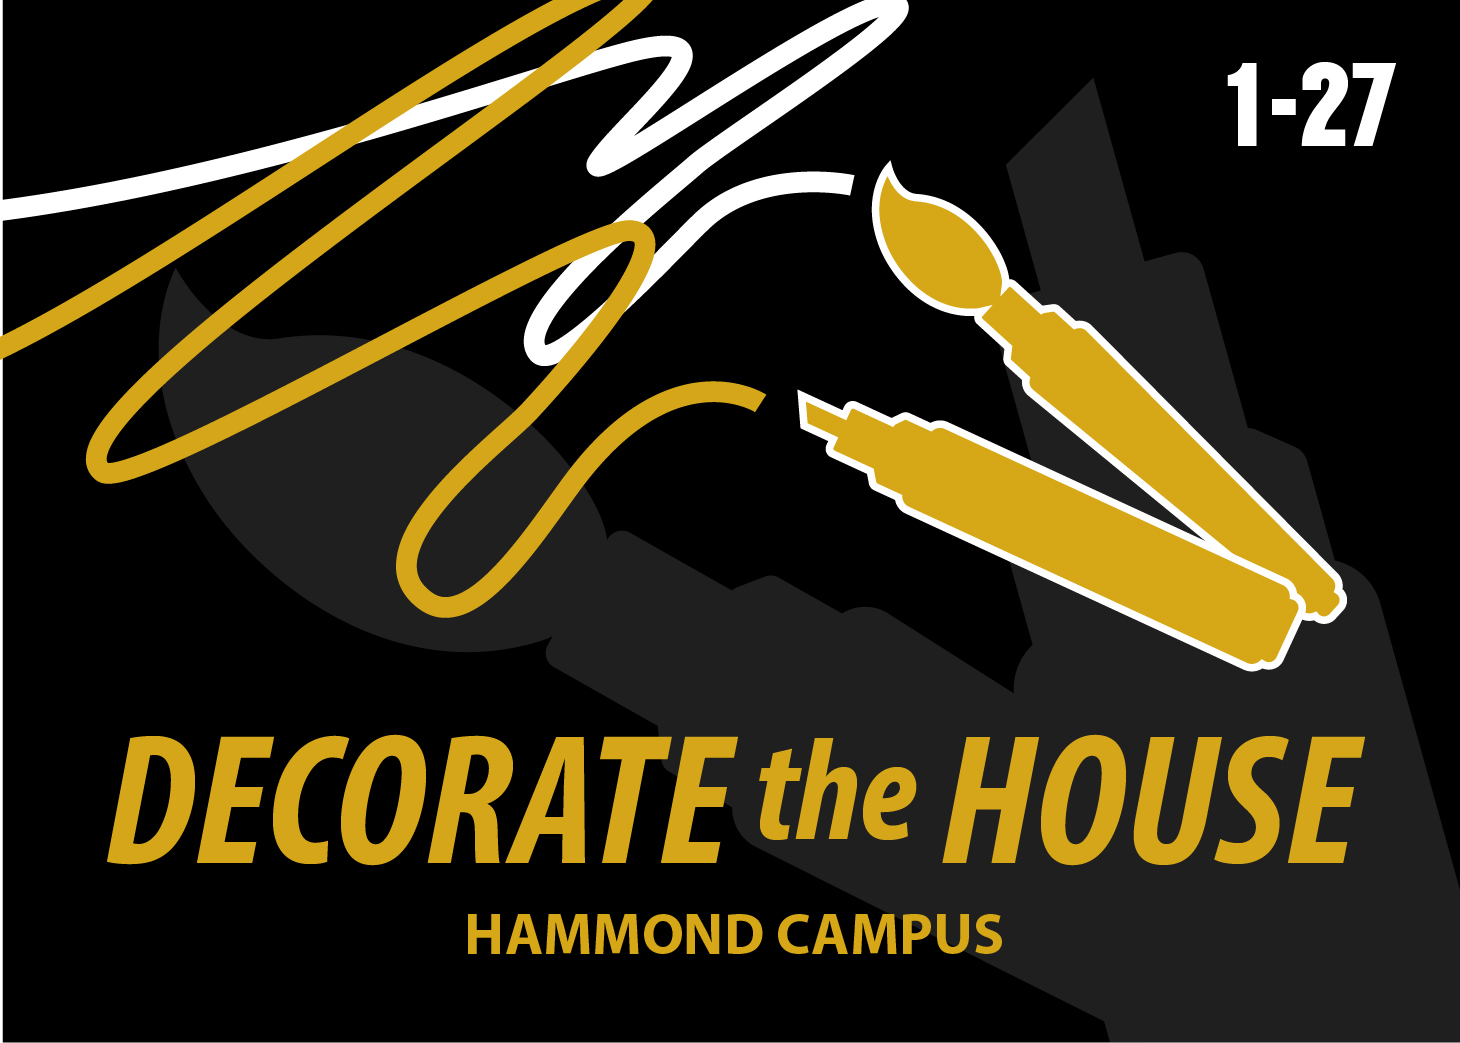 Graphic: A gold graphic of a paint brush and marker drawing white and gold lines on a black background. There is a larger gray version of the paint brush and marker on the background. Text at the bottom reads "Decorate the House Hammond Campus".